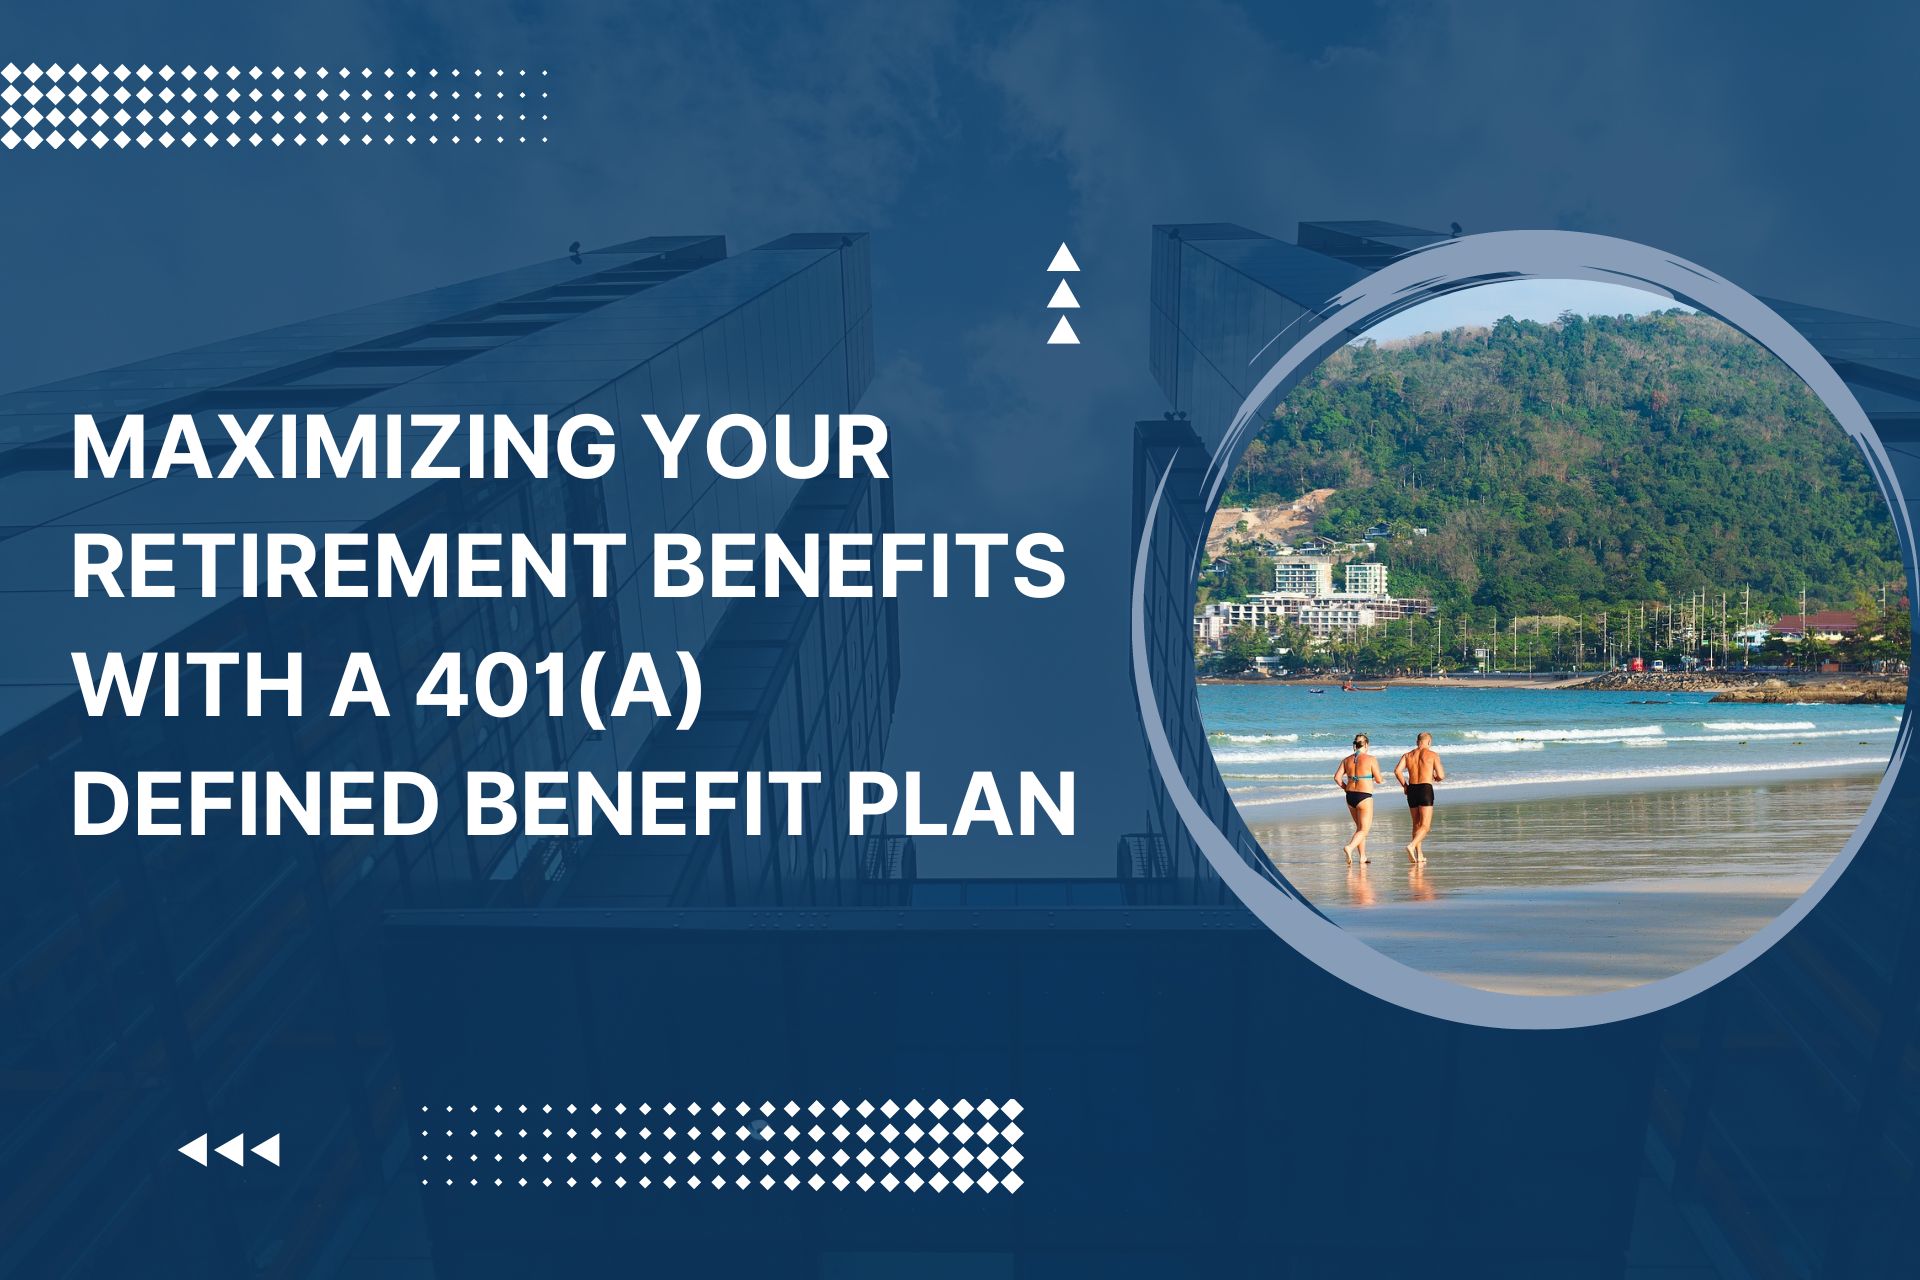 401(a) Defined Benefit Plan